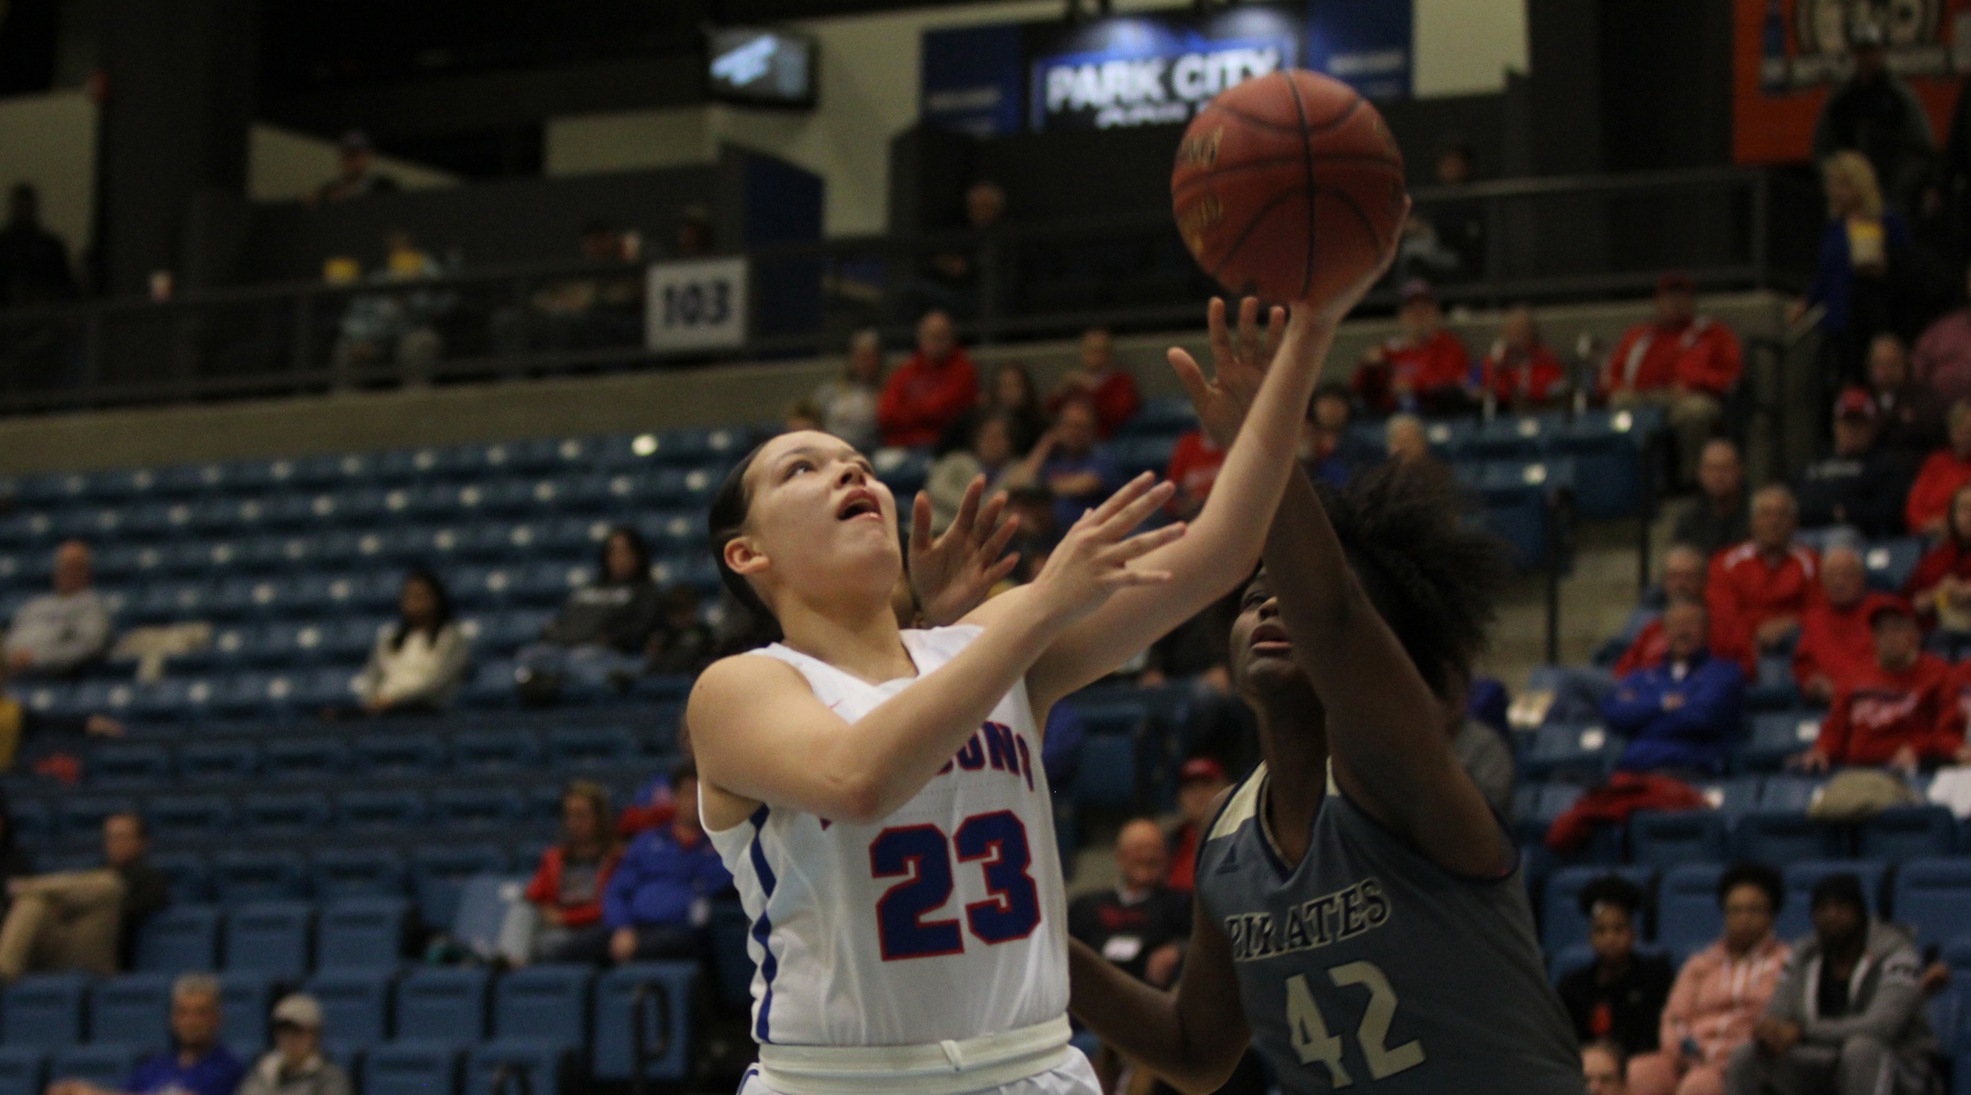 Makayla Vannett scored 17 points and hit three big 3-pointers to help the No. 8 Blue Dragons to a 74-62 win over Independence in the quarterfinals of the Region VI Tournament at Hartman Arena in Park City on Saturday. (Bre Rogers/Blue Dragon Sports Information).